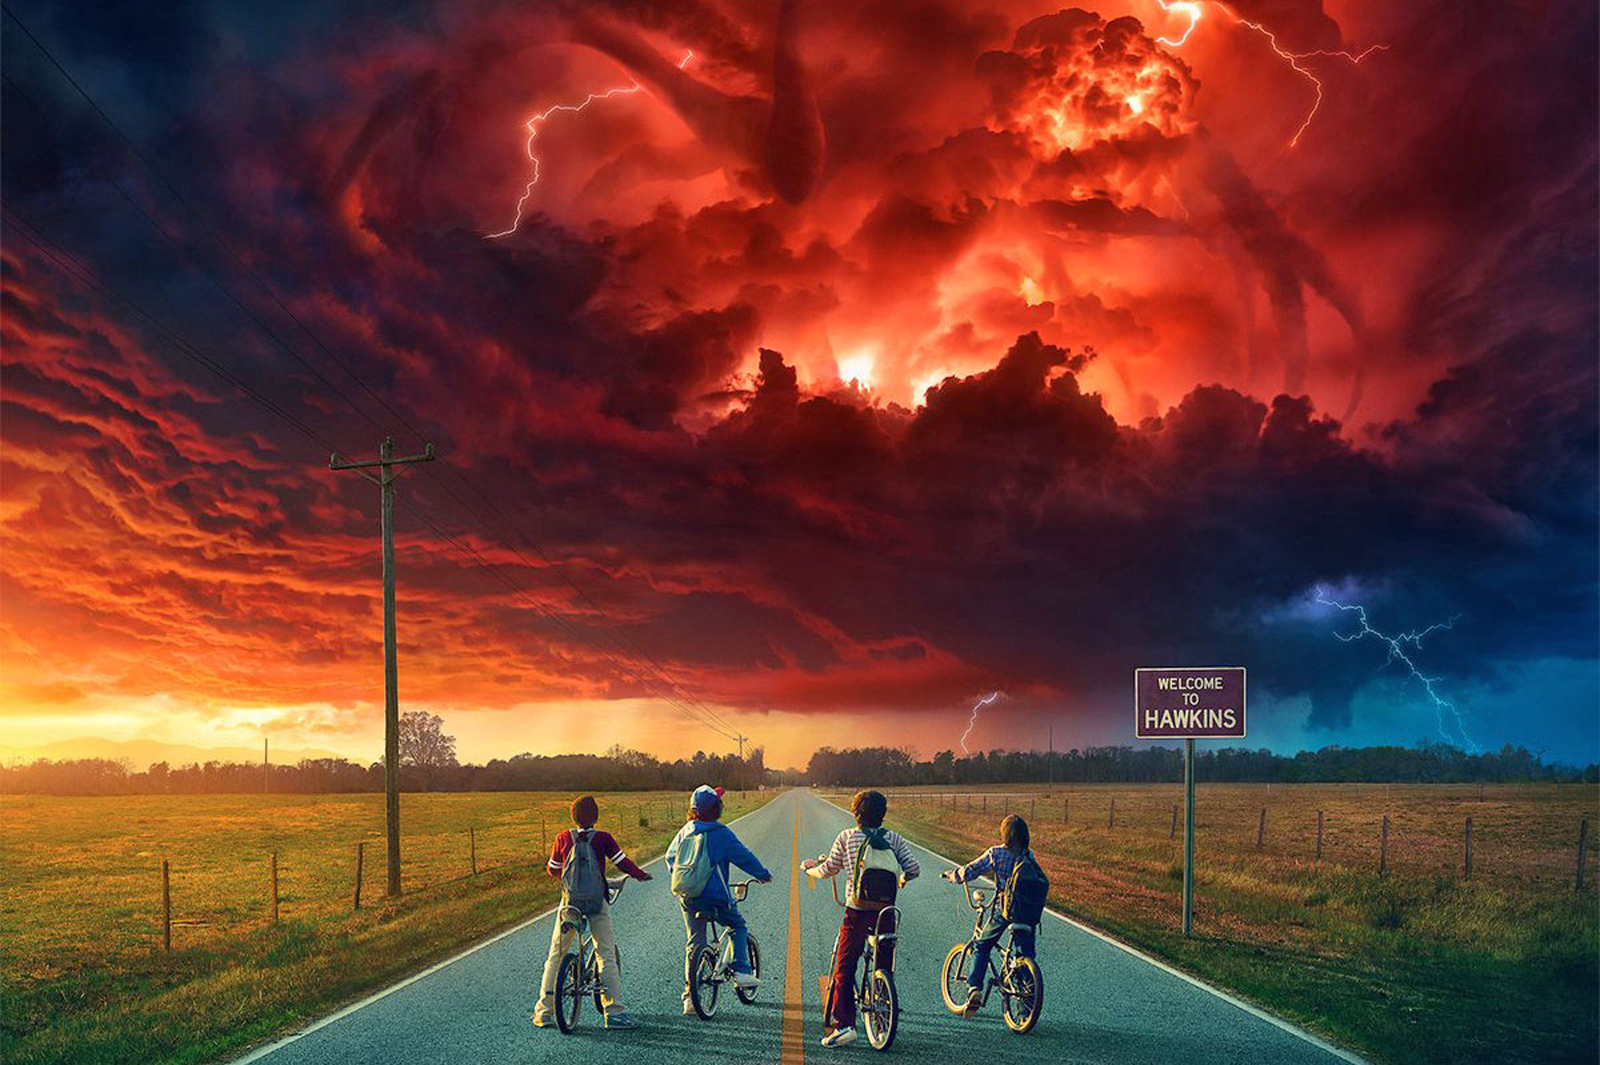 Hide behind the sofa, Stranger Things and is back with a terrifying soundtrack